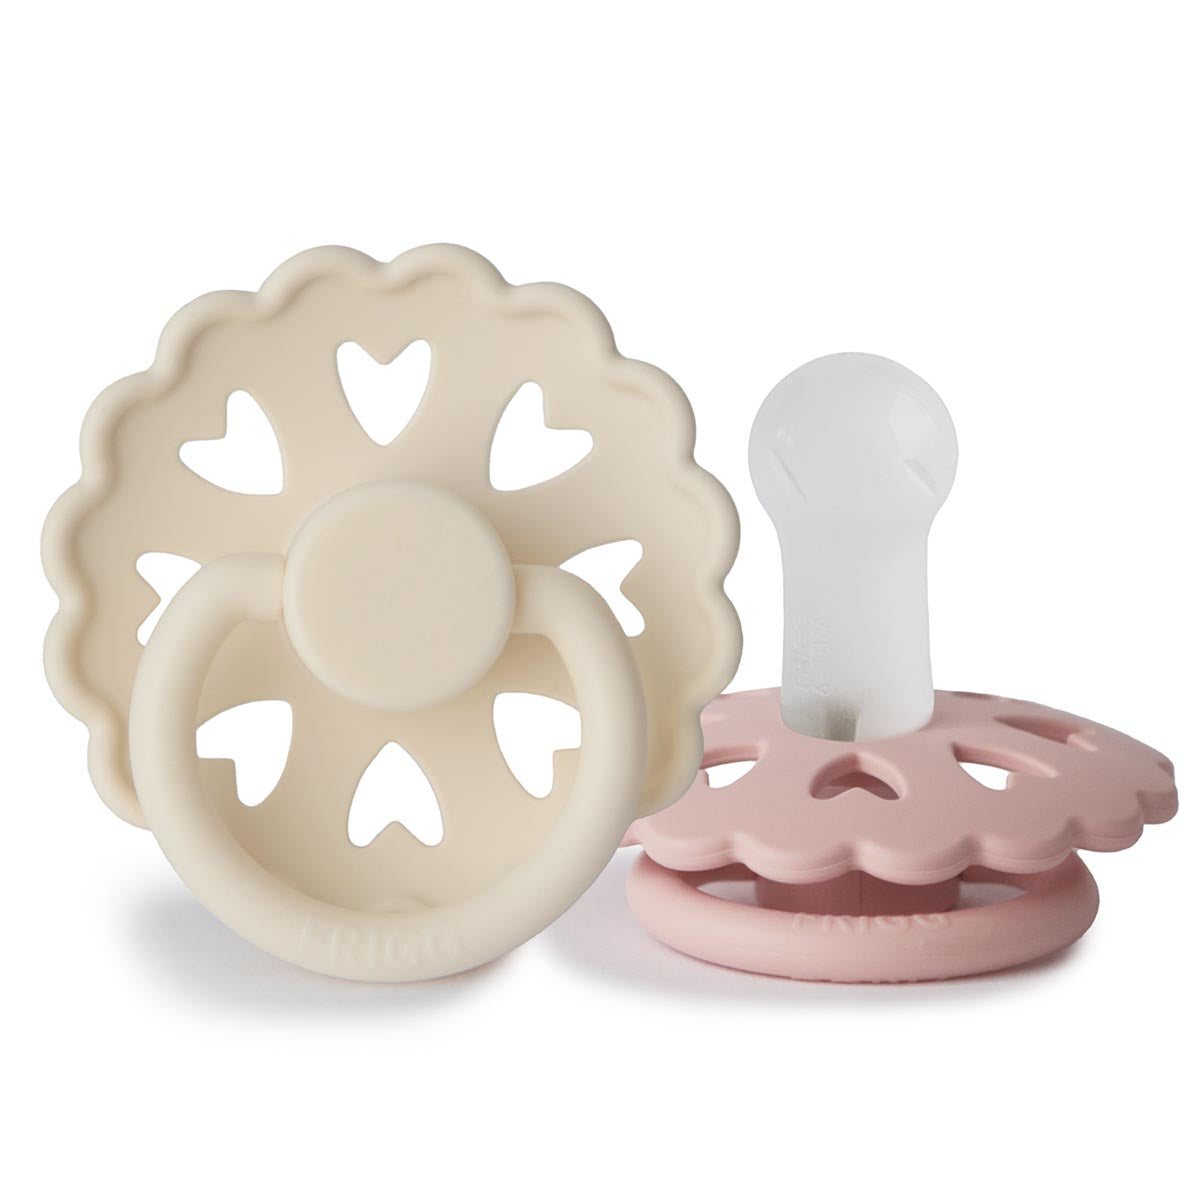 FRIGG Fairytale Pacifier 2 Pack Silicone